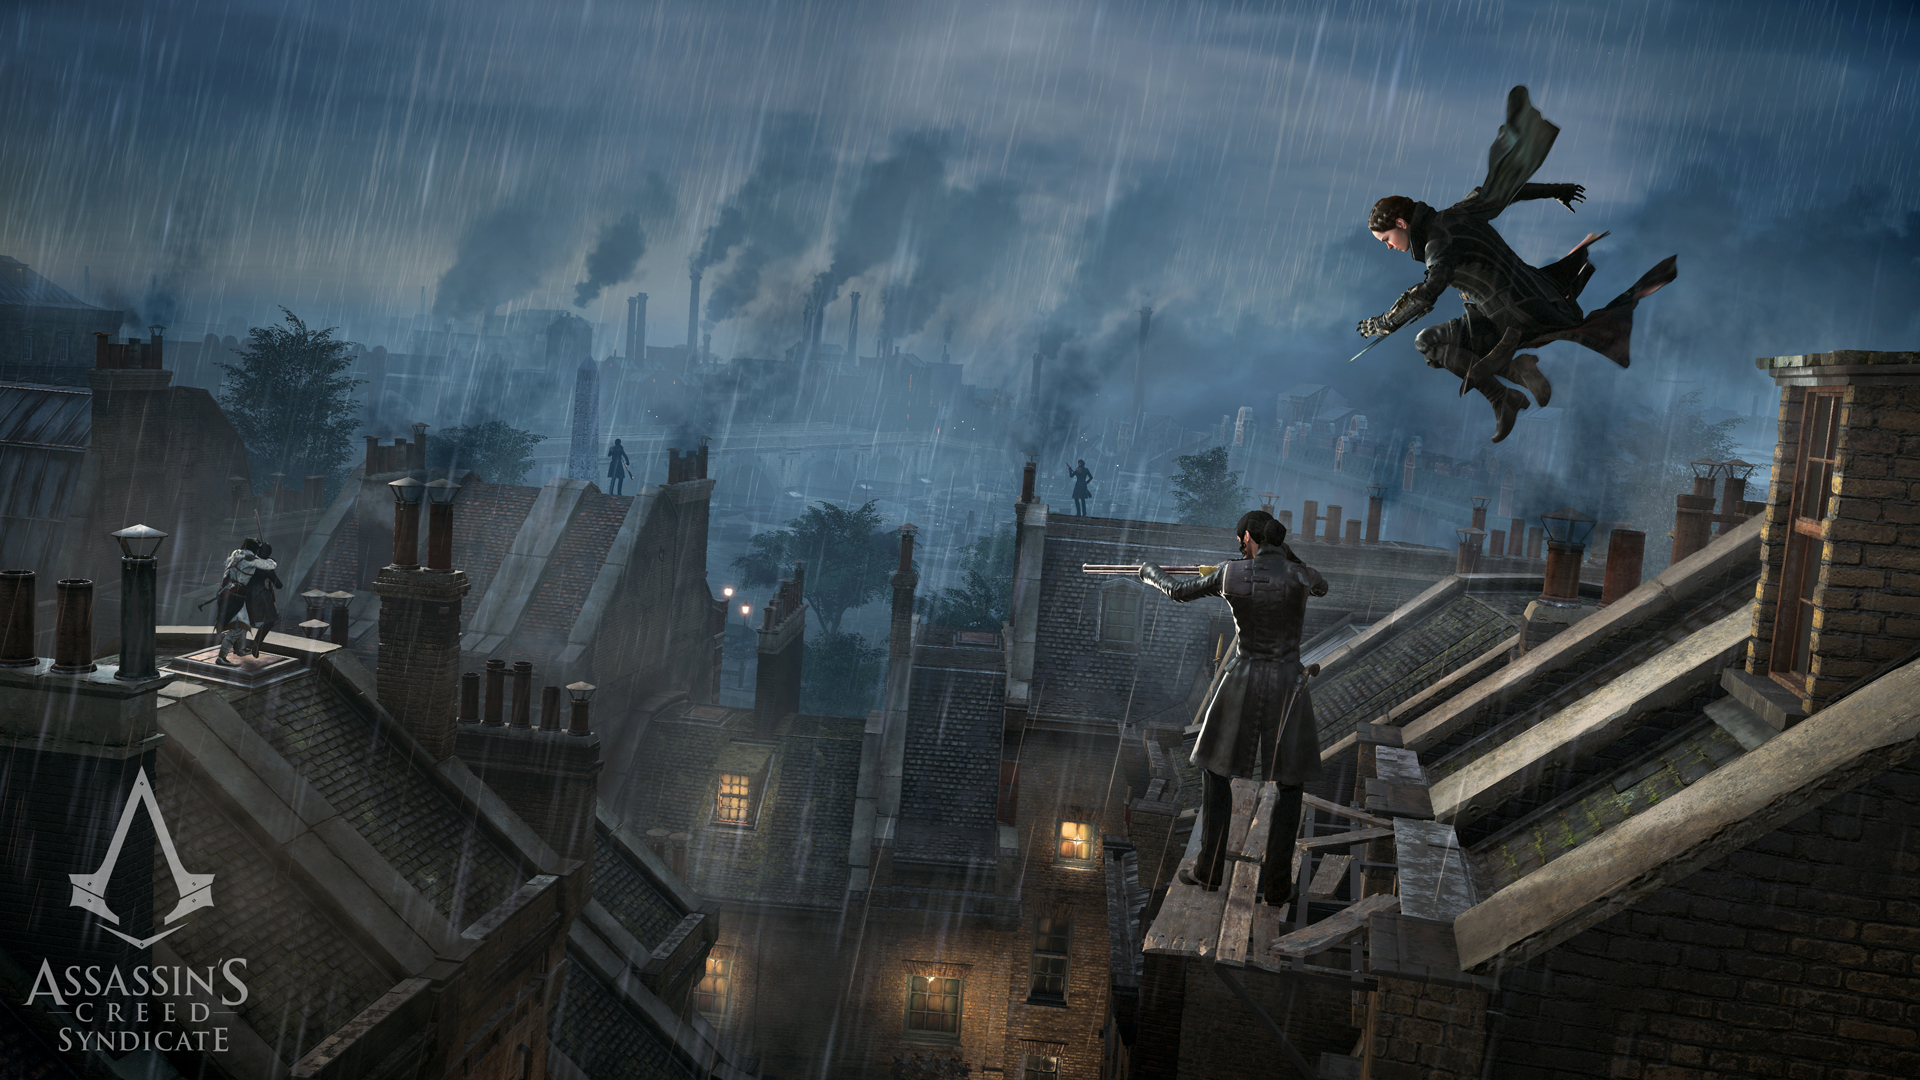 High Resolution Wallpaper | Assassin's Creed: Syndicate 1920x1080 px